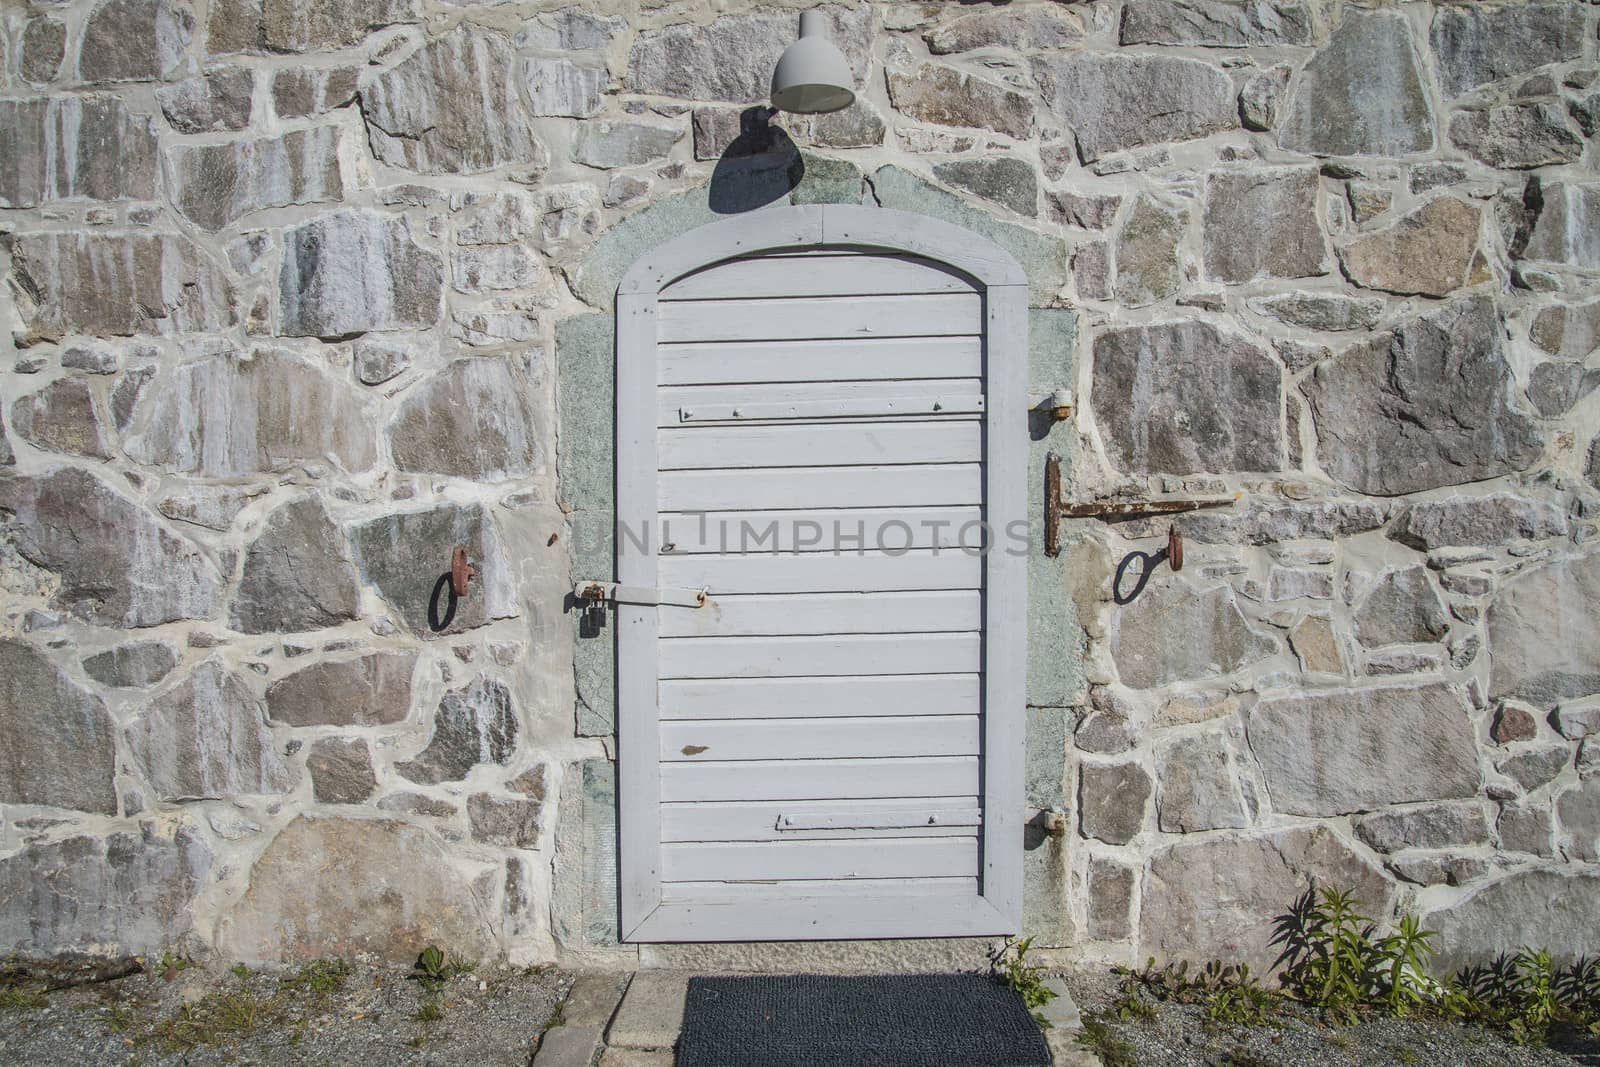 The building is on two floors, the ground floor was built in 1745 and the second floor was built in 1835. Image is shot at Fredriksten Fortress in Halden, Norway a day in September 2013.